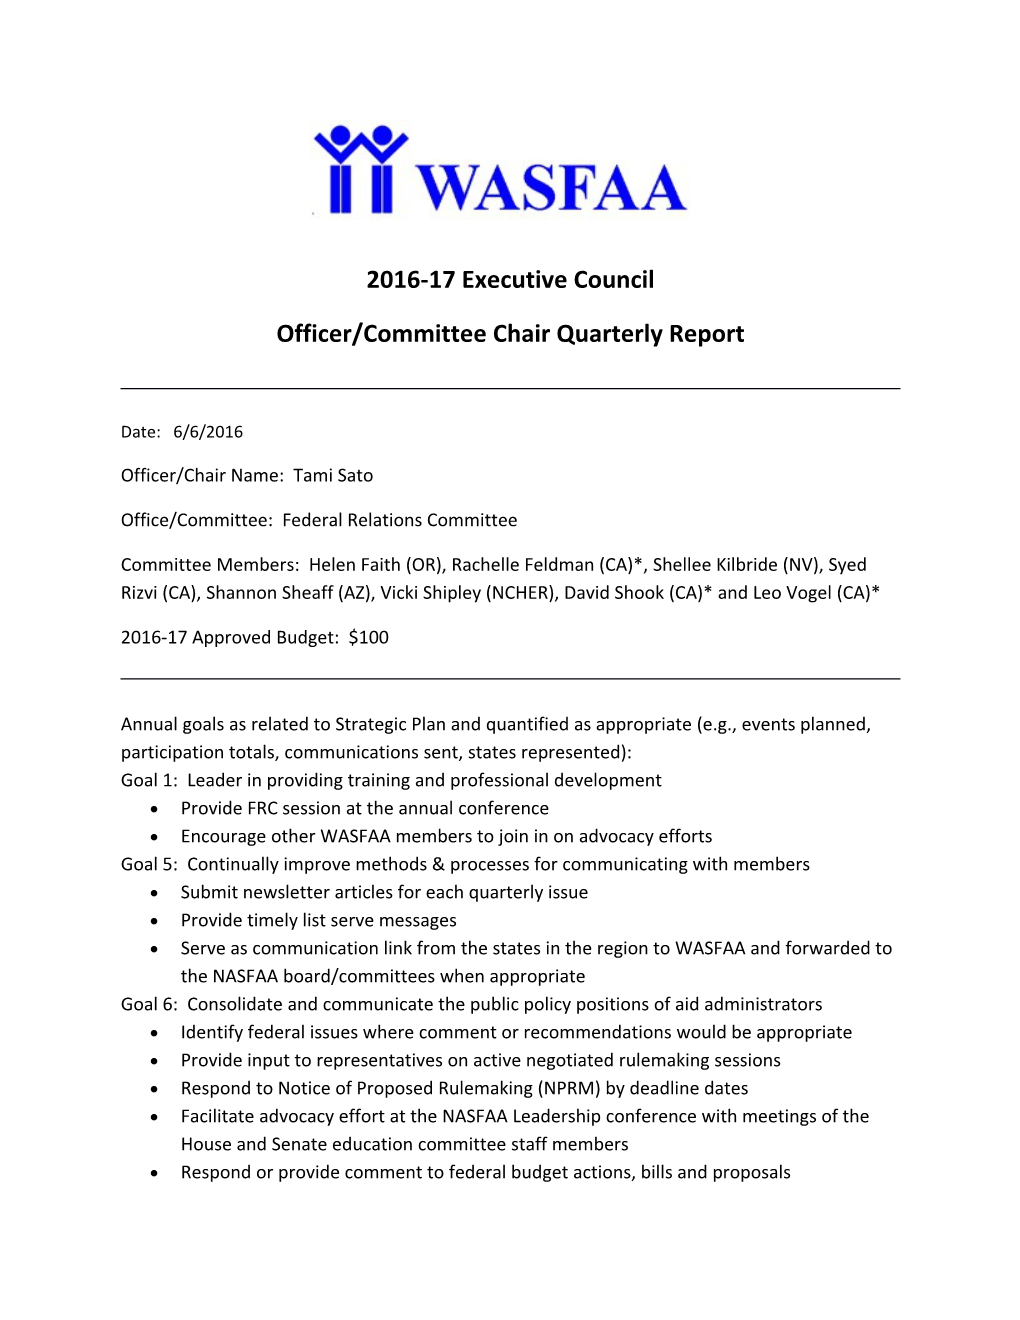 Officer/Committee Chair Quarterly Report